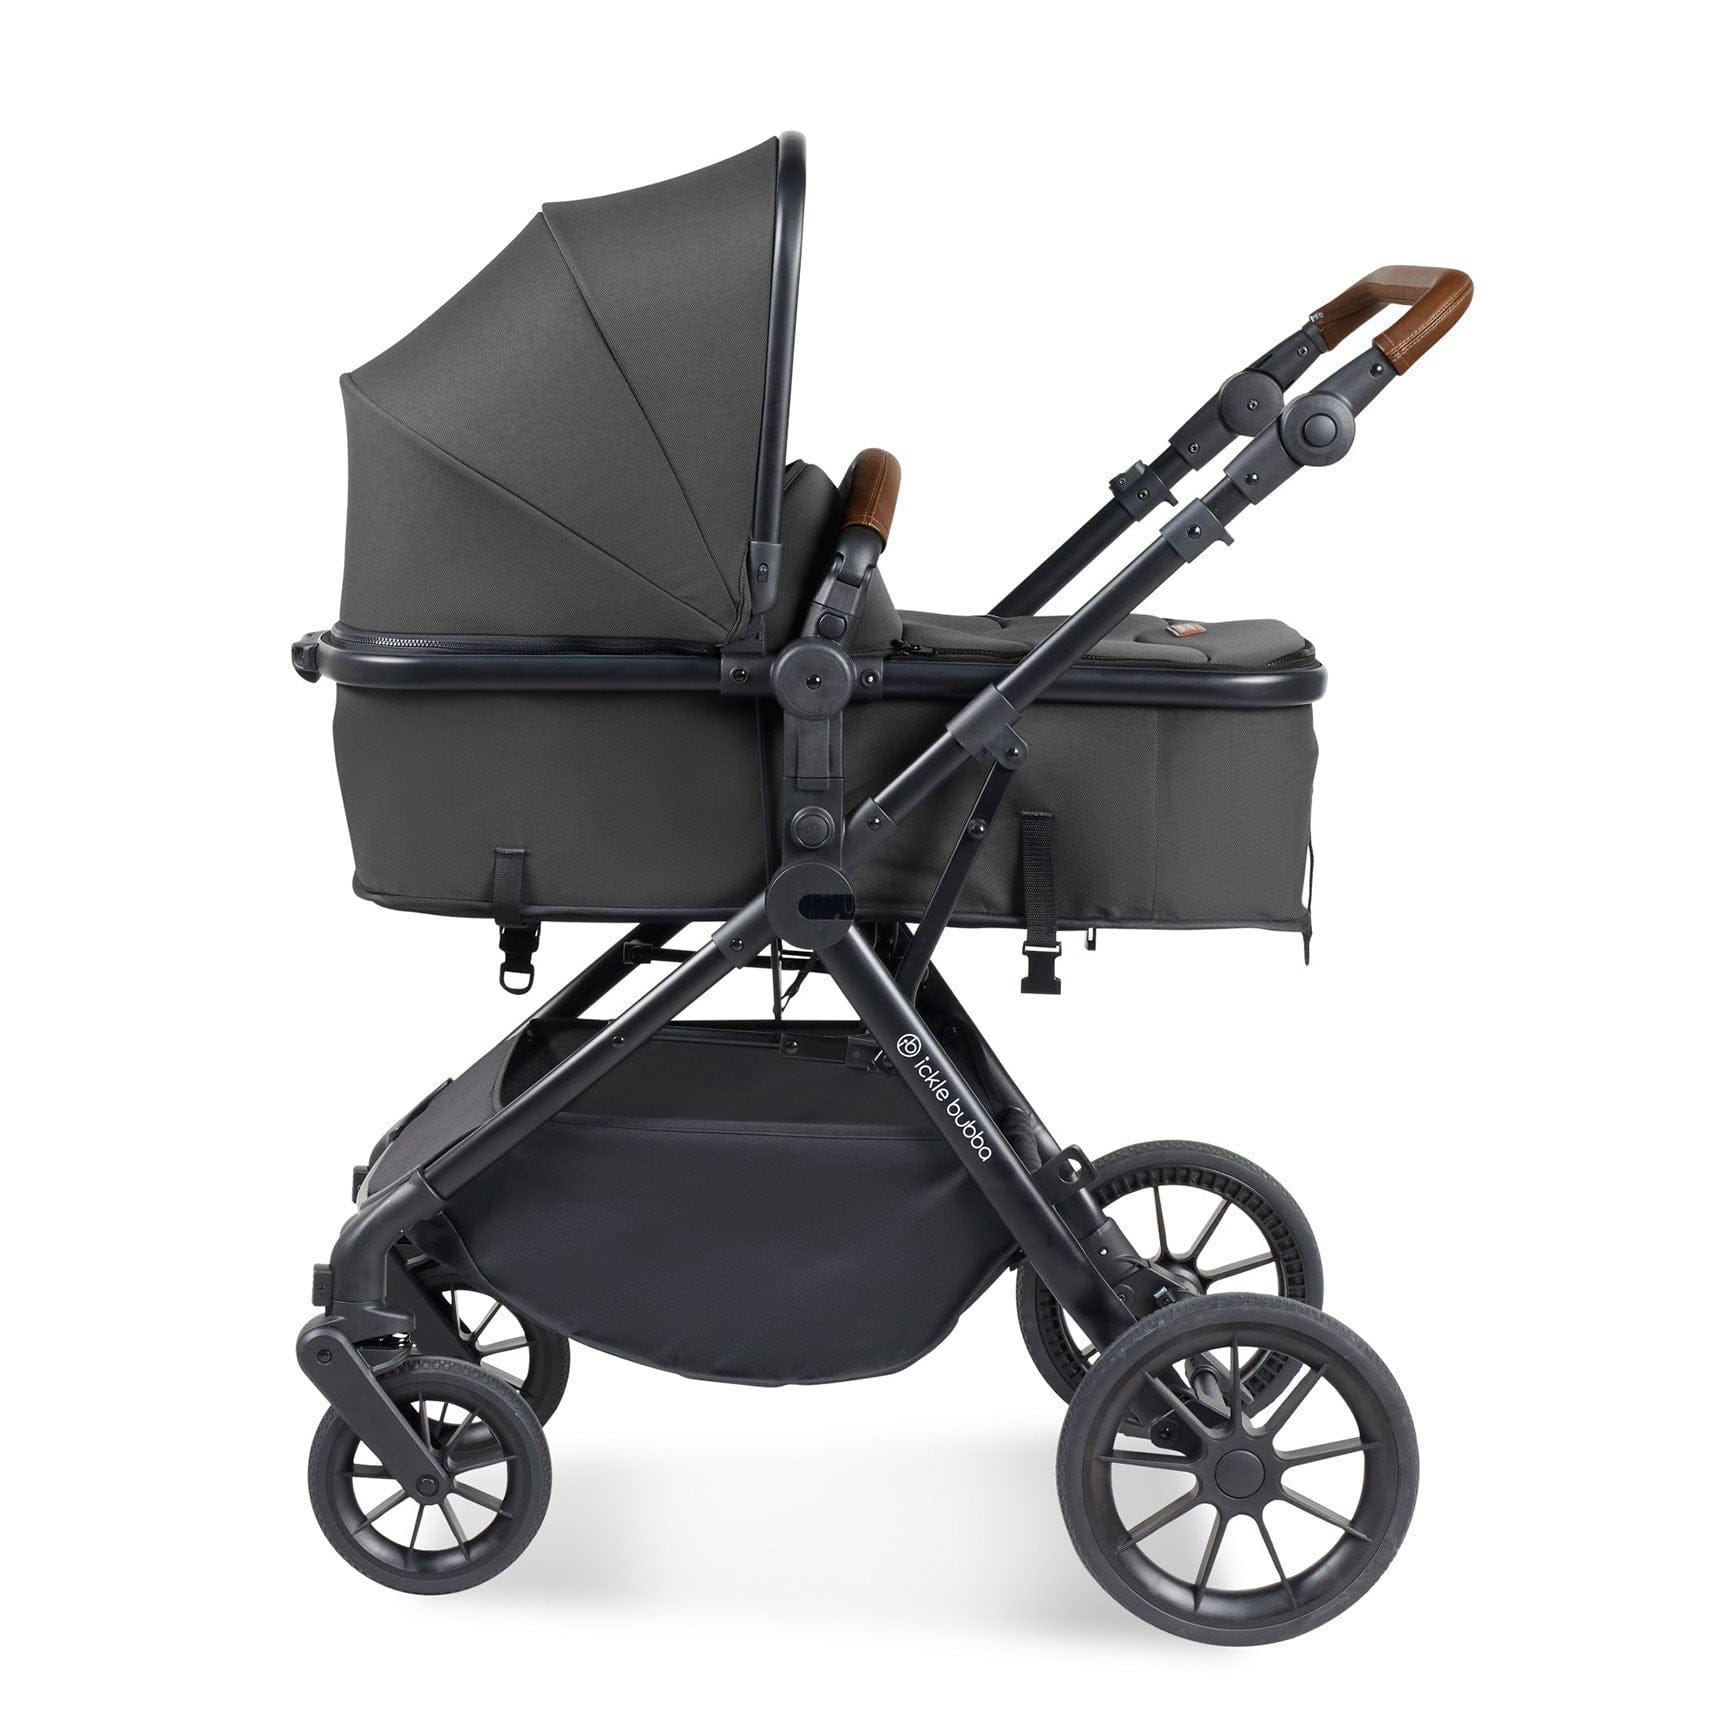 Ickle Bubba Ickle Bubba Cosmo 2 in 1 Plus Carrycot & Pushchair in Black/Graphite Grey Travel Systems 10-007-001-007 5056515025620